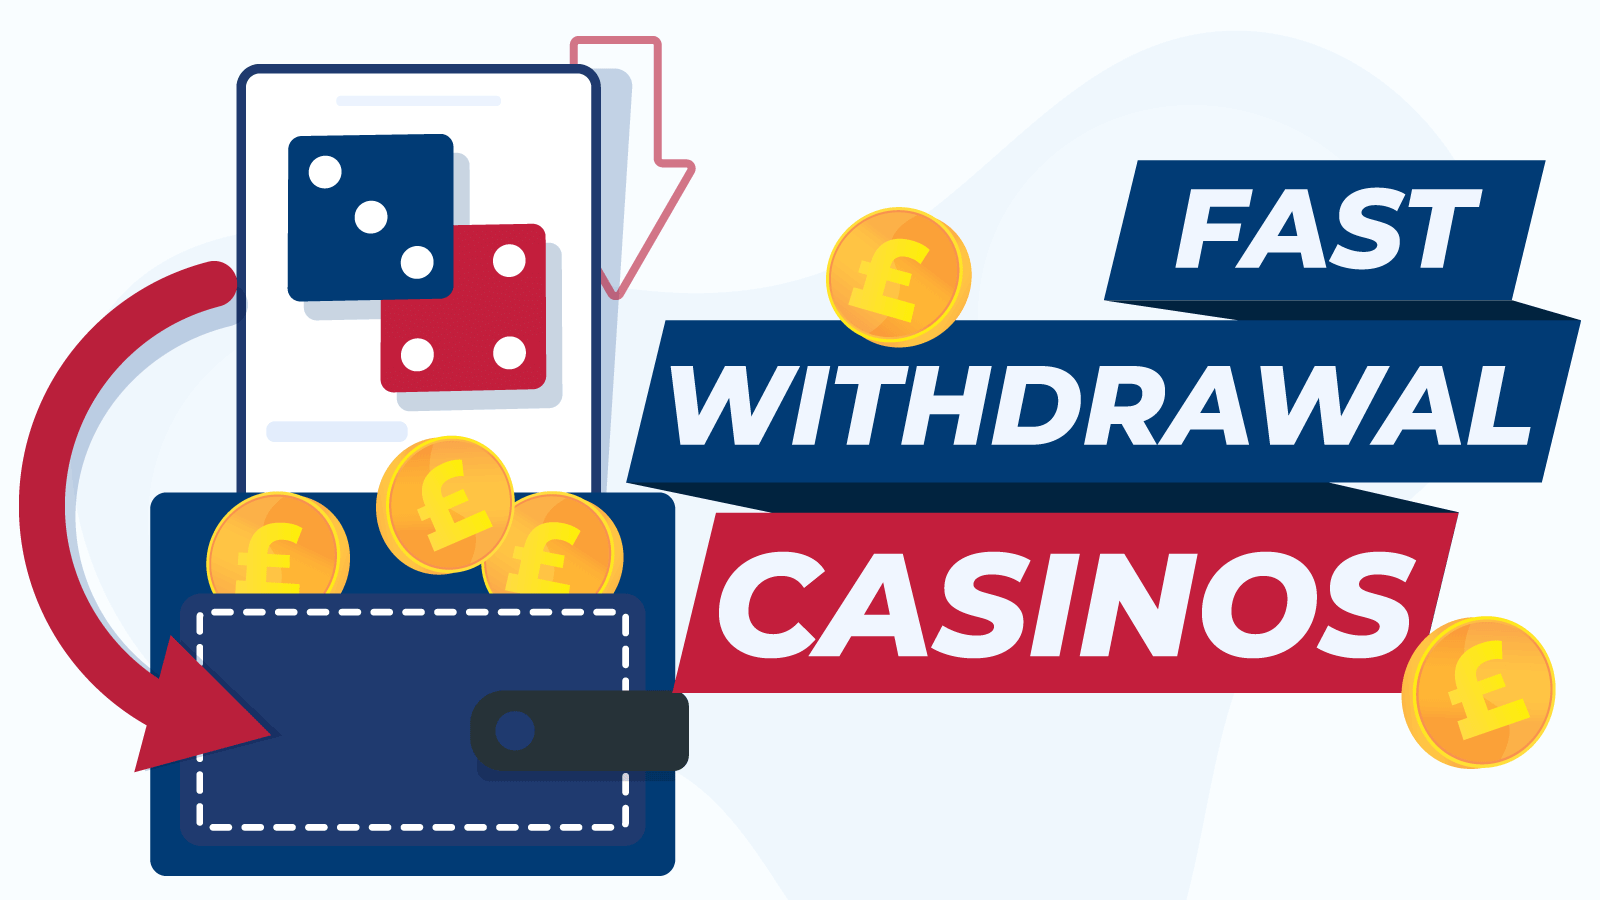 Fast Withdrawal Casino - Best Slots Site For Fast Withdrawals